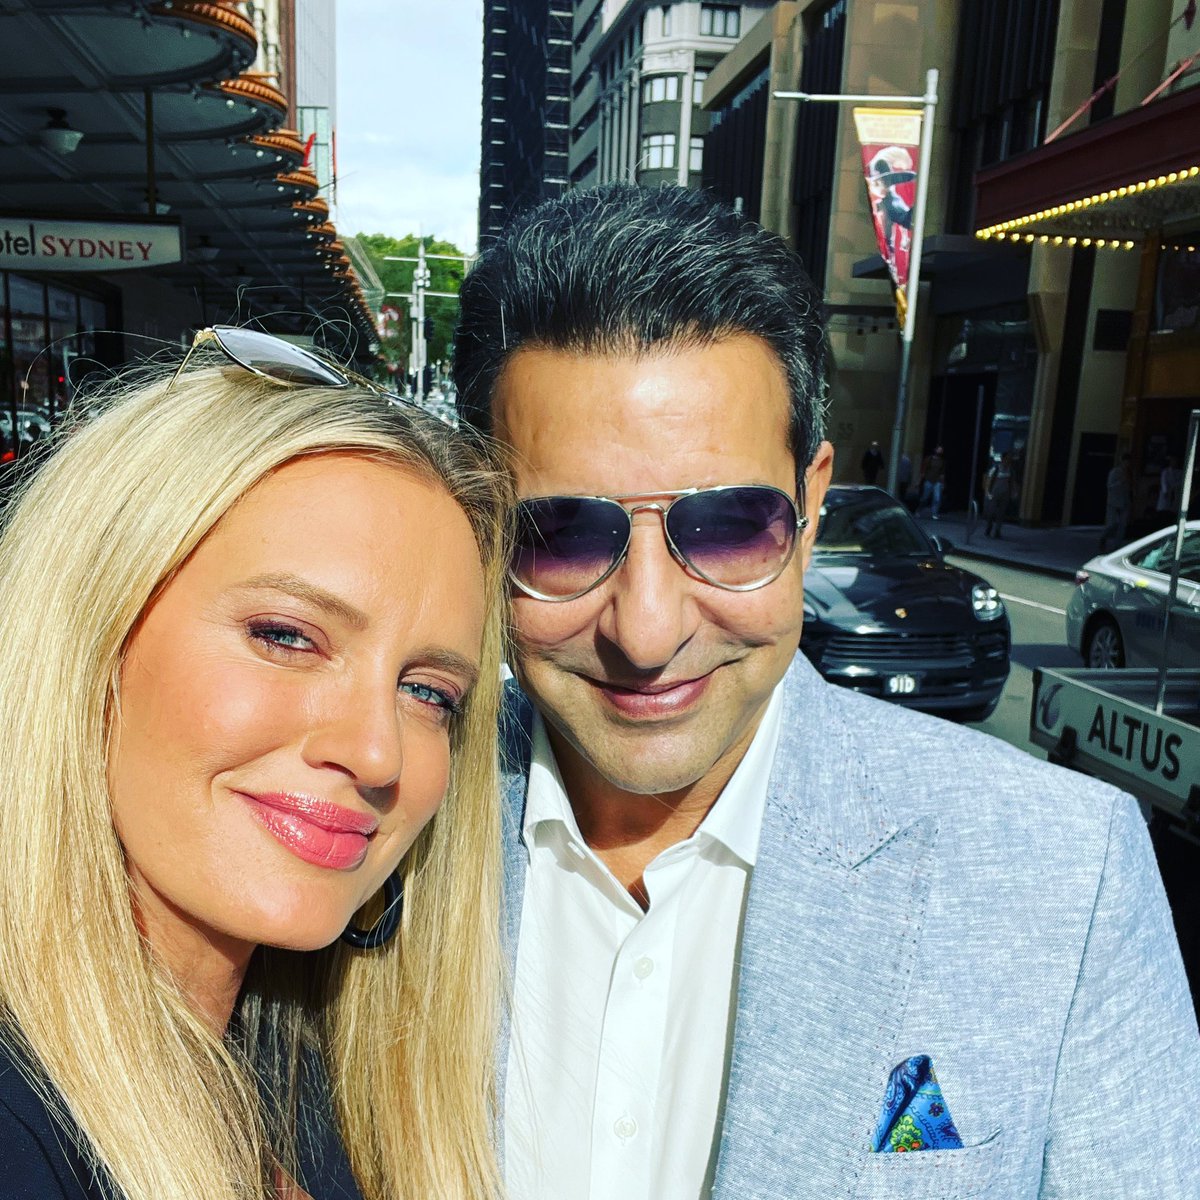 Finally @iamshaniera and I back together after three months of lots of work in Pakistan. Hello Sydney #Sydney #Australia #mywife #mylife #Backtogether #MissedYou